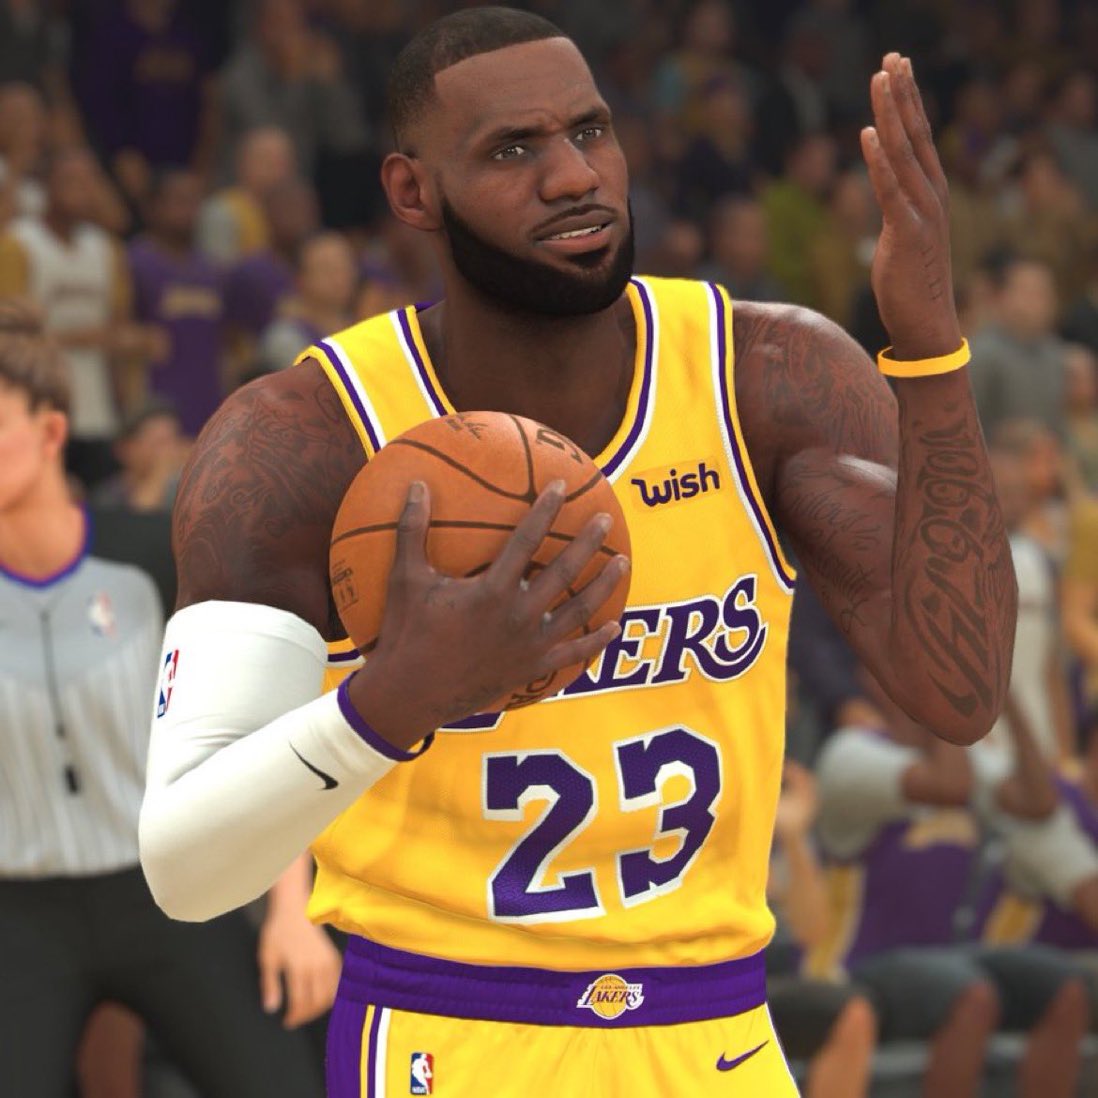 LeBron James’ tattoo artist has lost a copyright lawsuit against NBA2K. The game can keep the tattoos on LeBron’s 2K player as it was not considered copyright infringement.